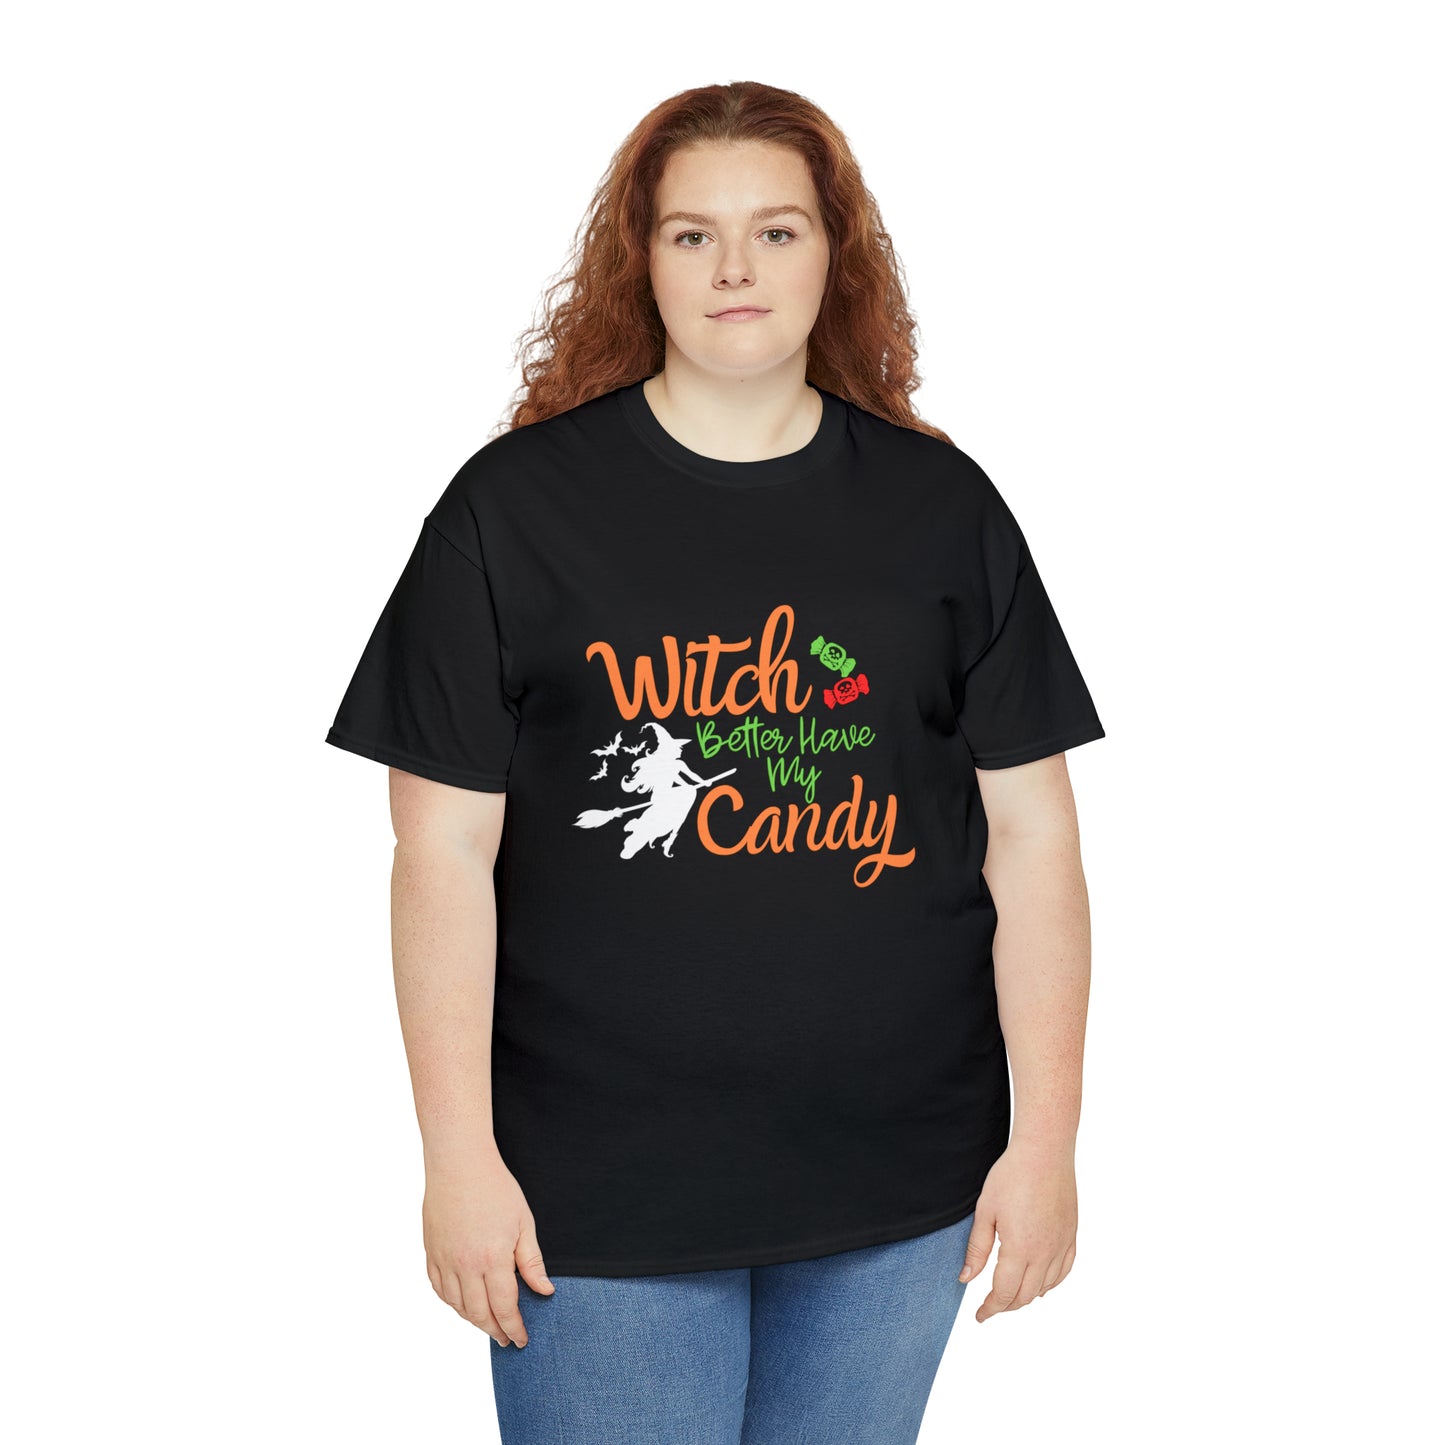 Fun Halloween Unisex Heavy Cotton Tee, available in black and grey.